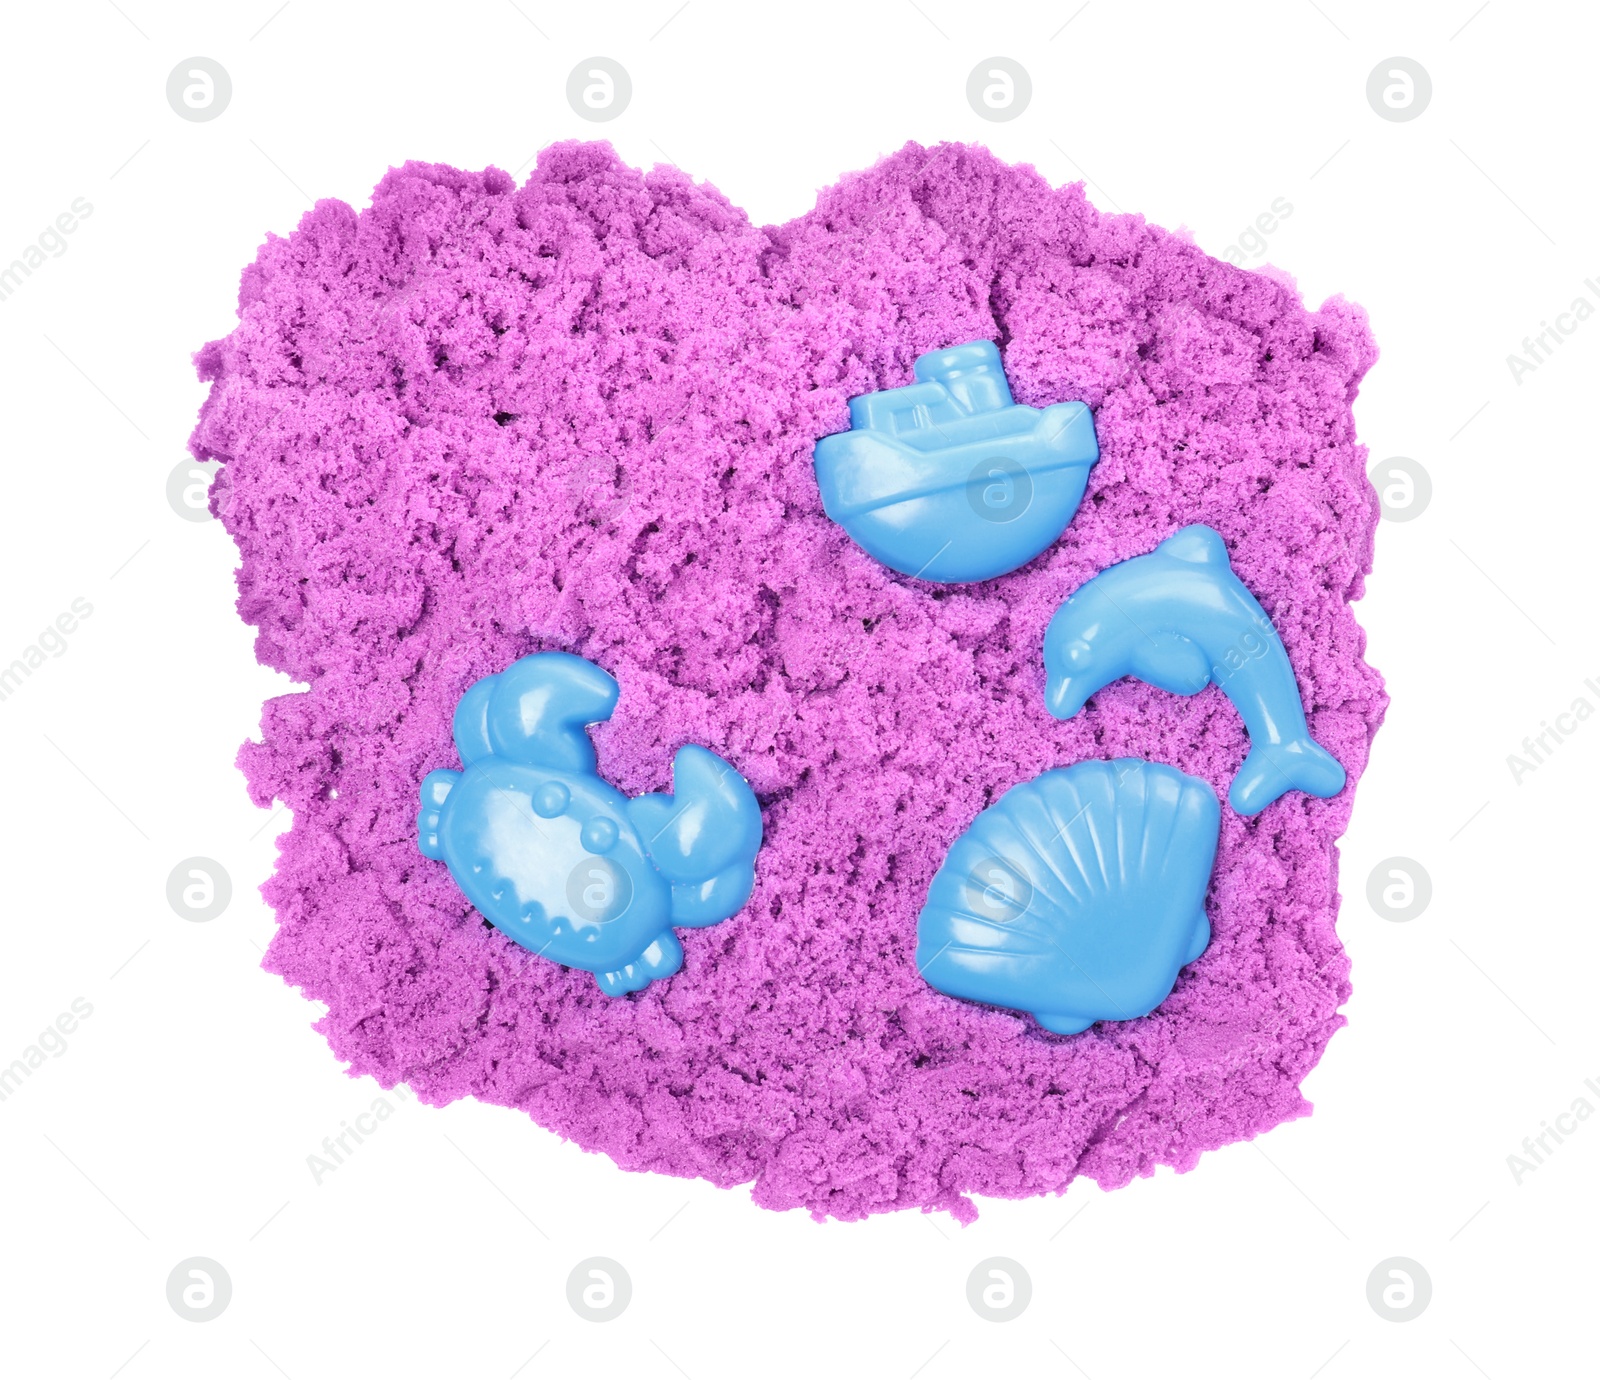 Photo of Violet kinetic sand and toys on white background, top view